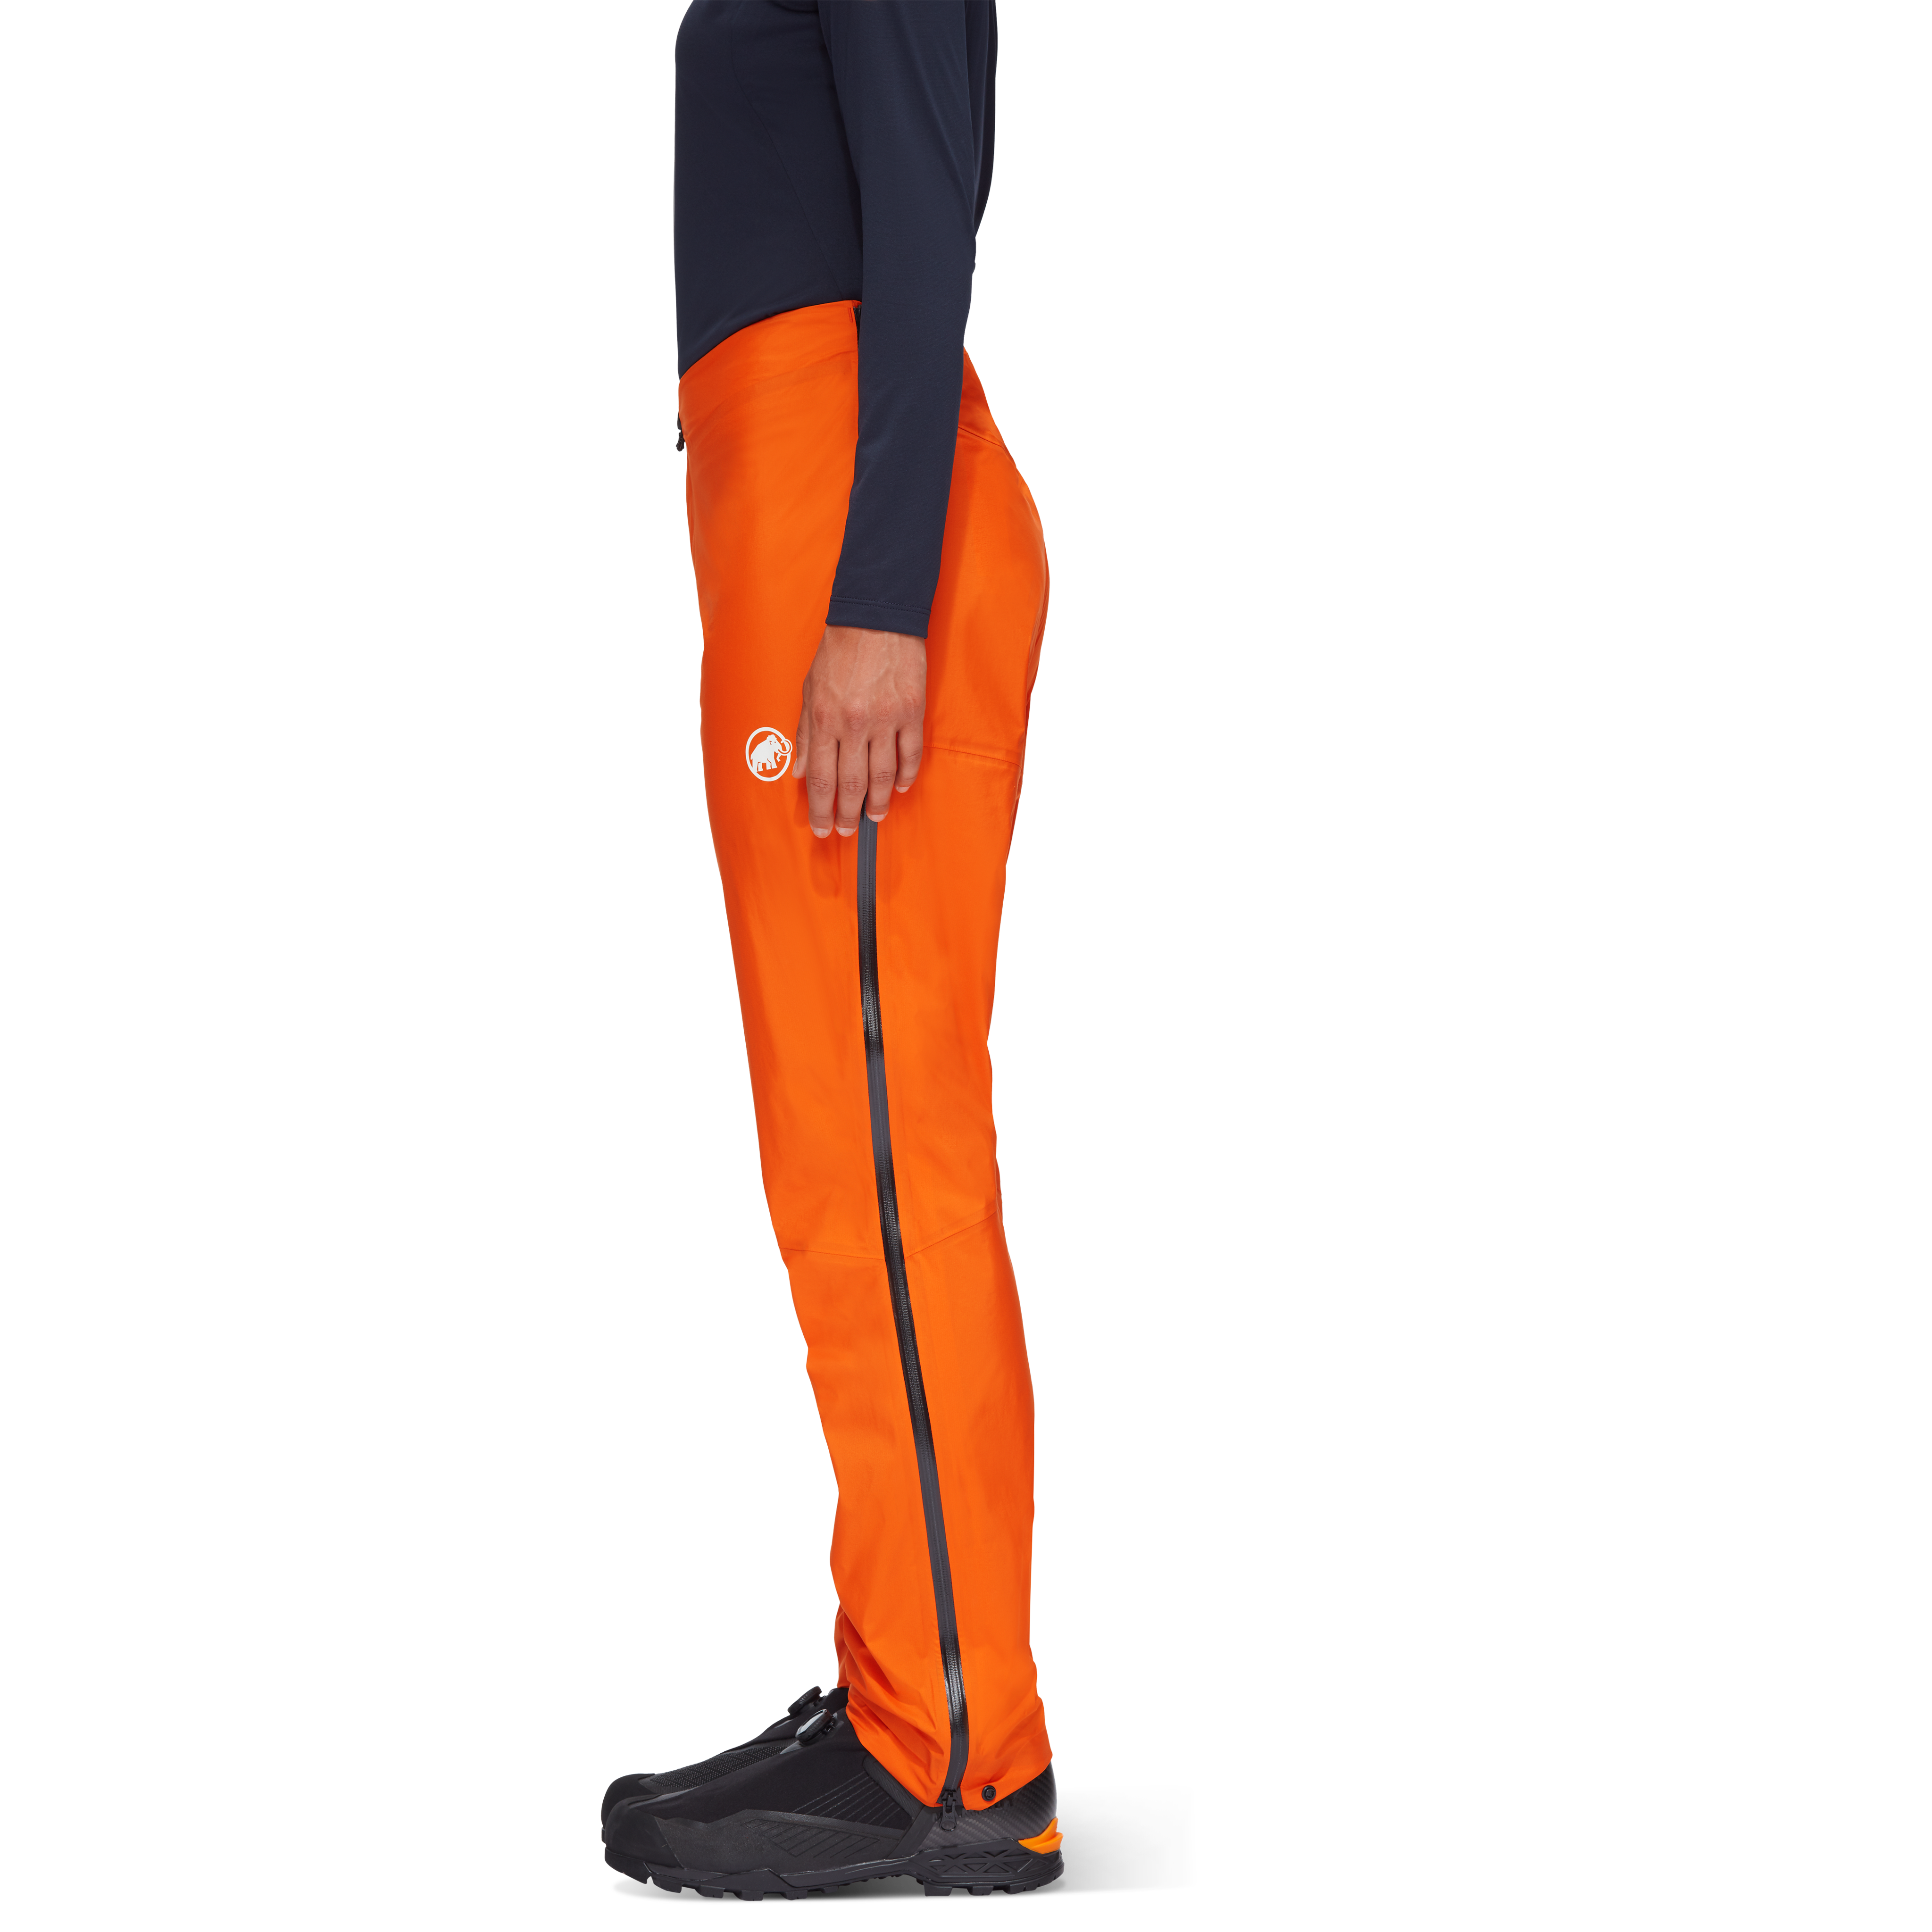 Nordwand Light HS Pants product image